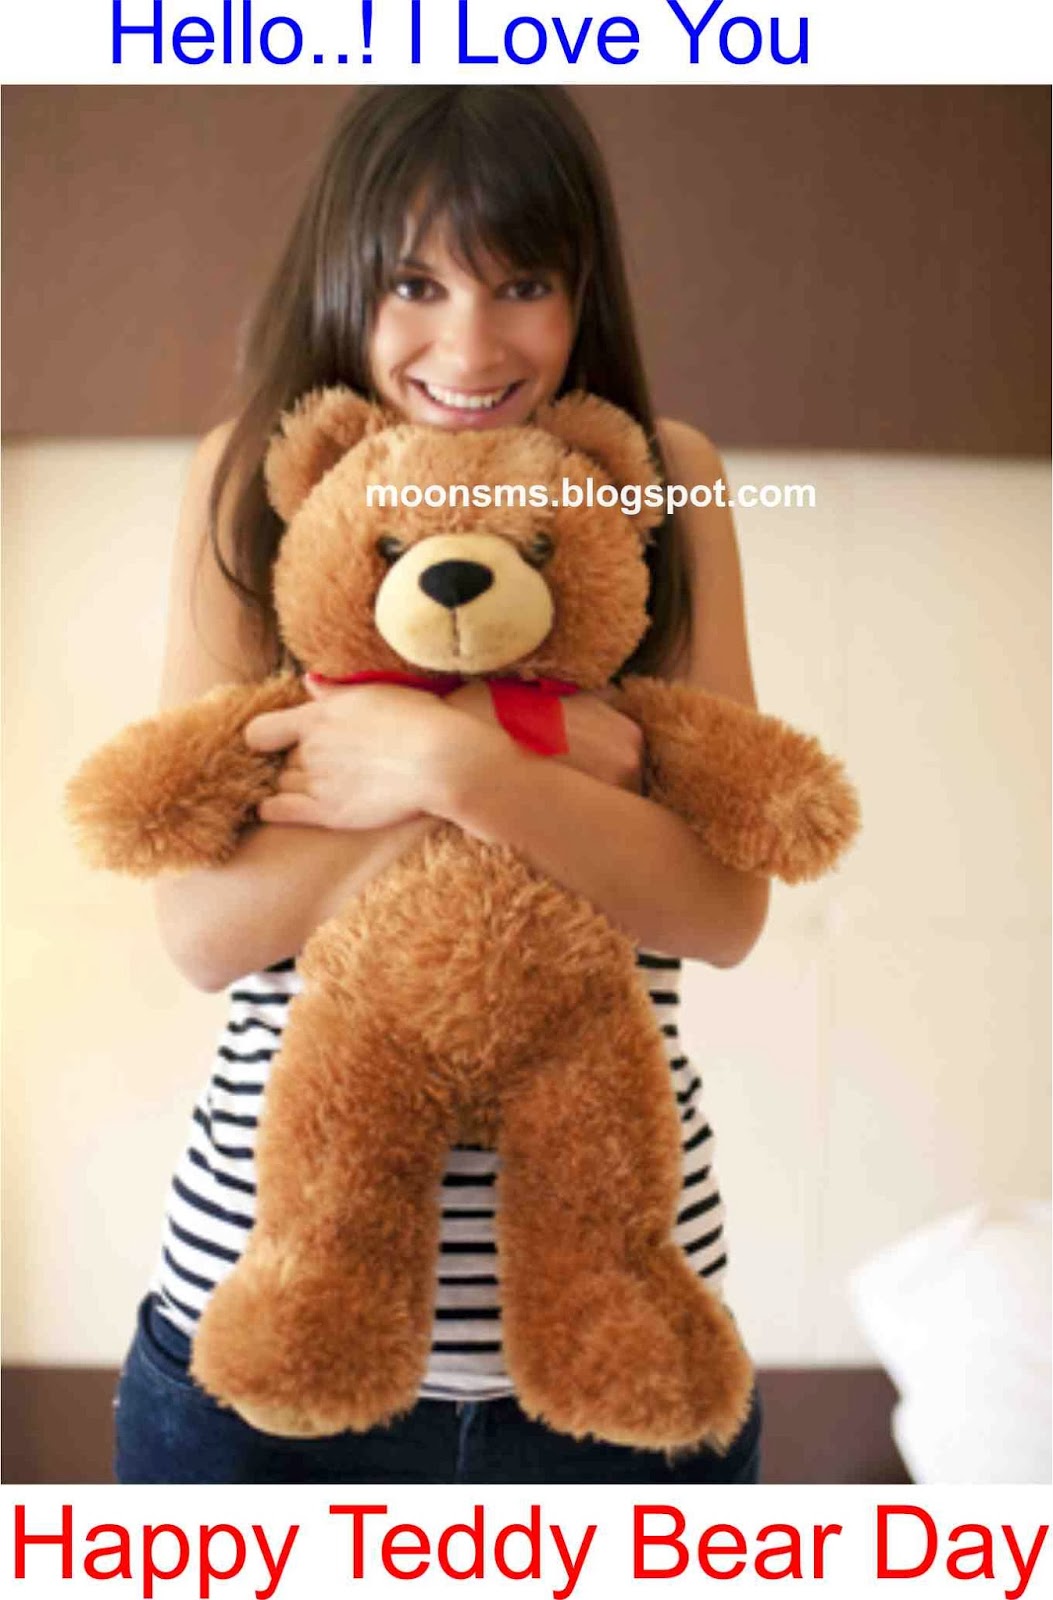 Christian-Post-moonsms: New latest Teddy Day sms in English Hindi